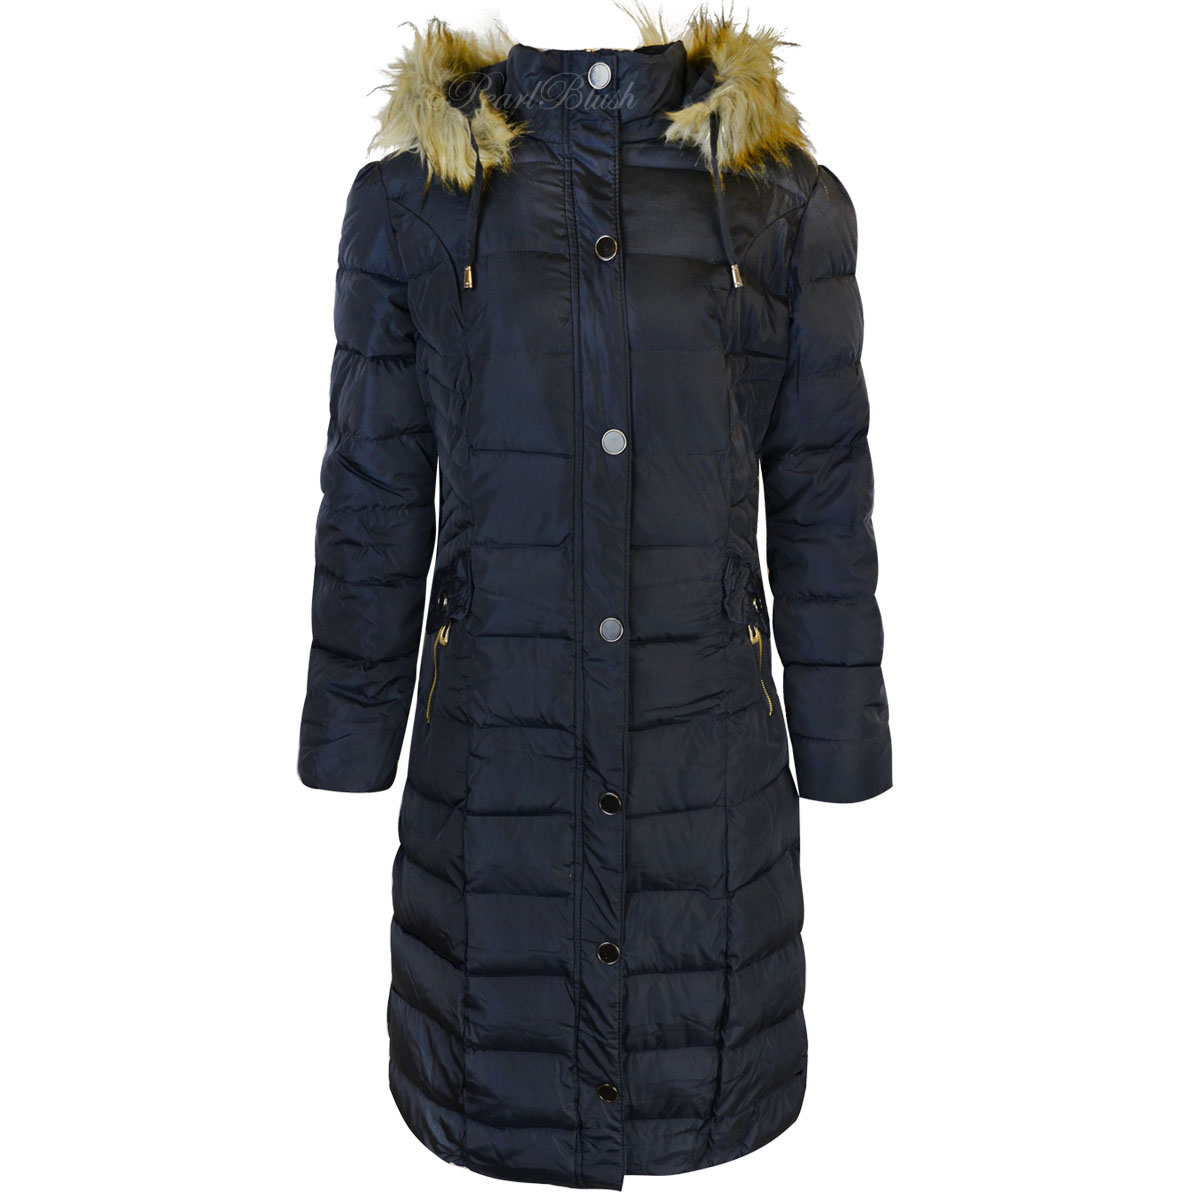 Ladies Womens Plus Fur Hooded Quilted Padded Winter Coat Puffa Parka ...